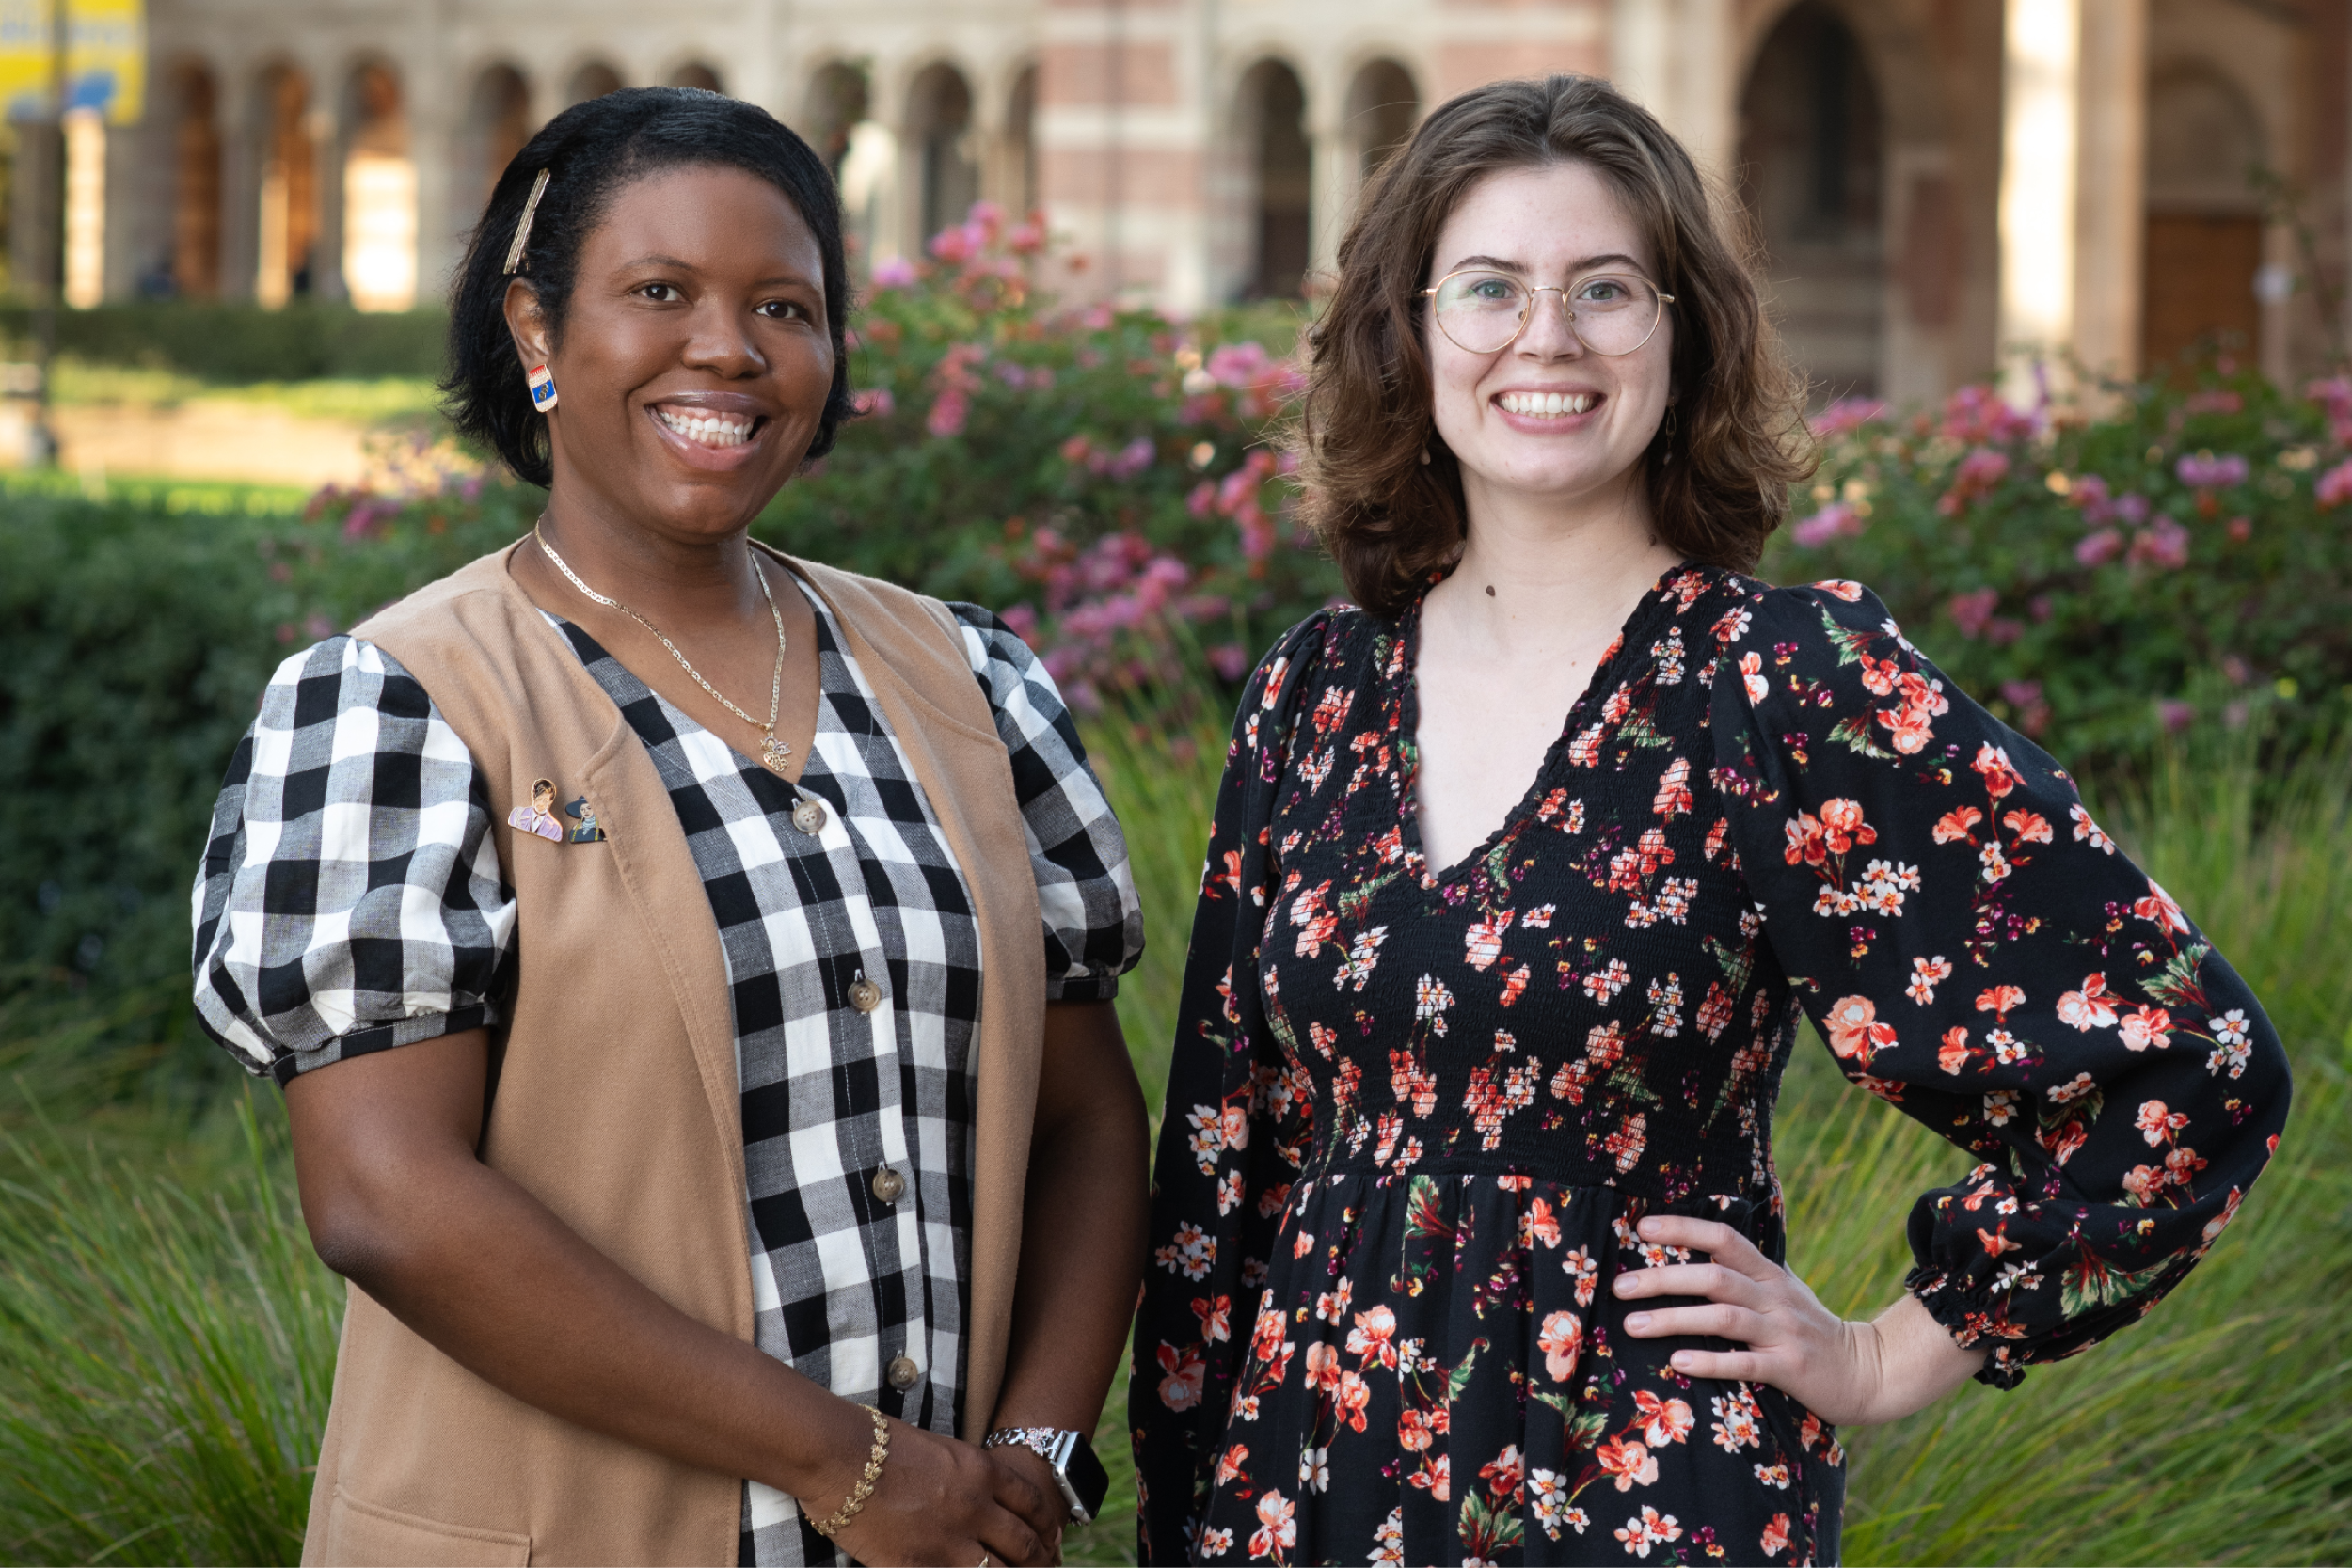 Tiffany Brannon (left) smiles in a black-and-white checkered dress and tan, sleeveless overcoat, hands clasped before her; Riley Marshall (right) smiles in a black floral dress, left hand on her waist; green foliage, pink flowers and the arches of Royce Hall stand behind them.